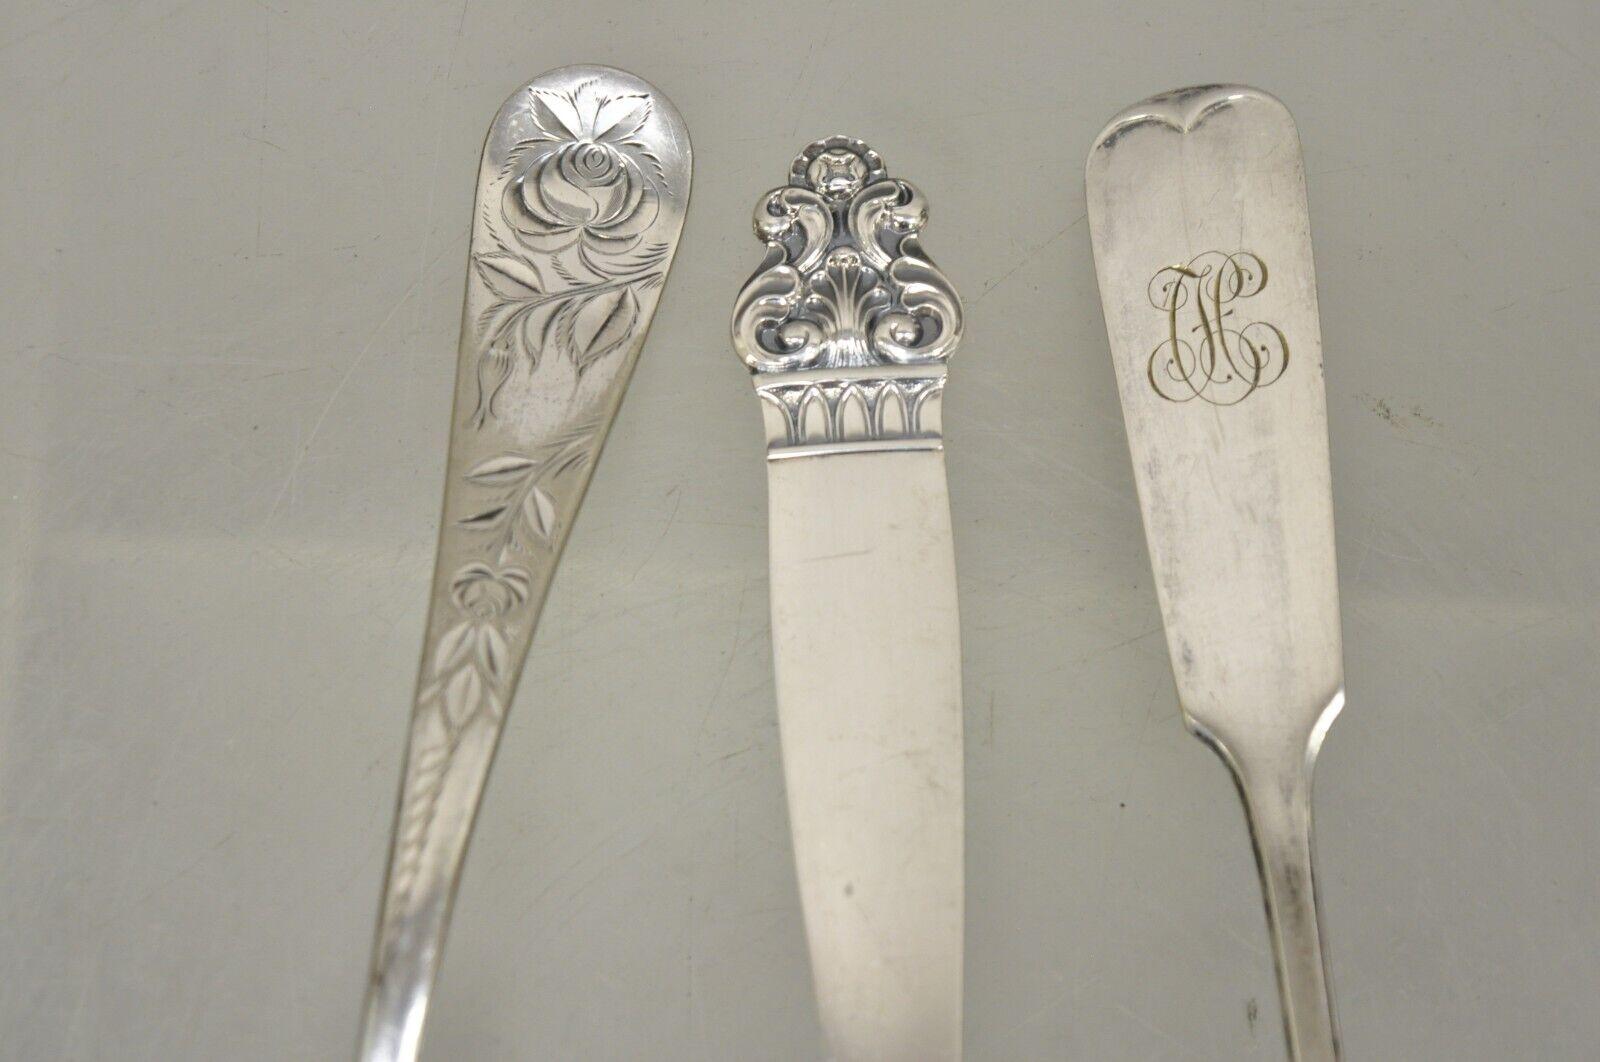 holmes and edwards silverware